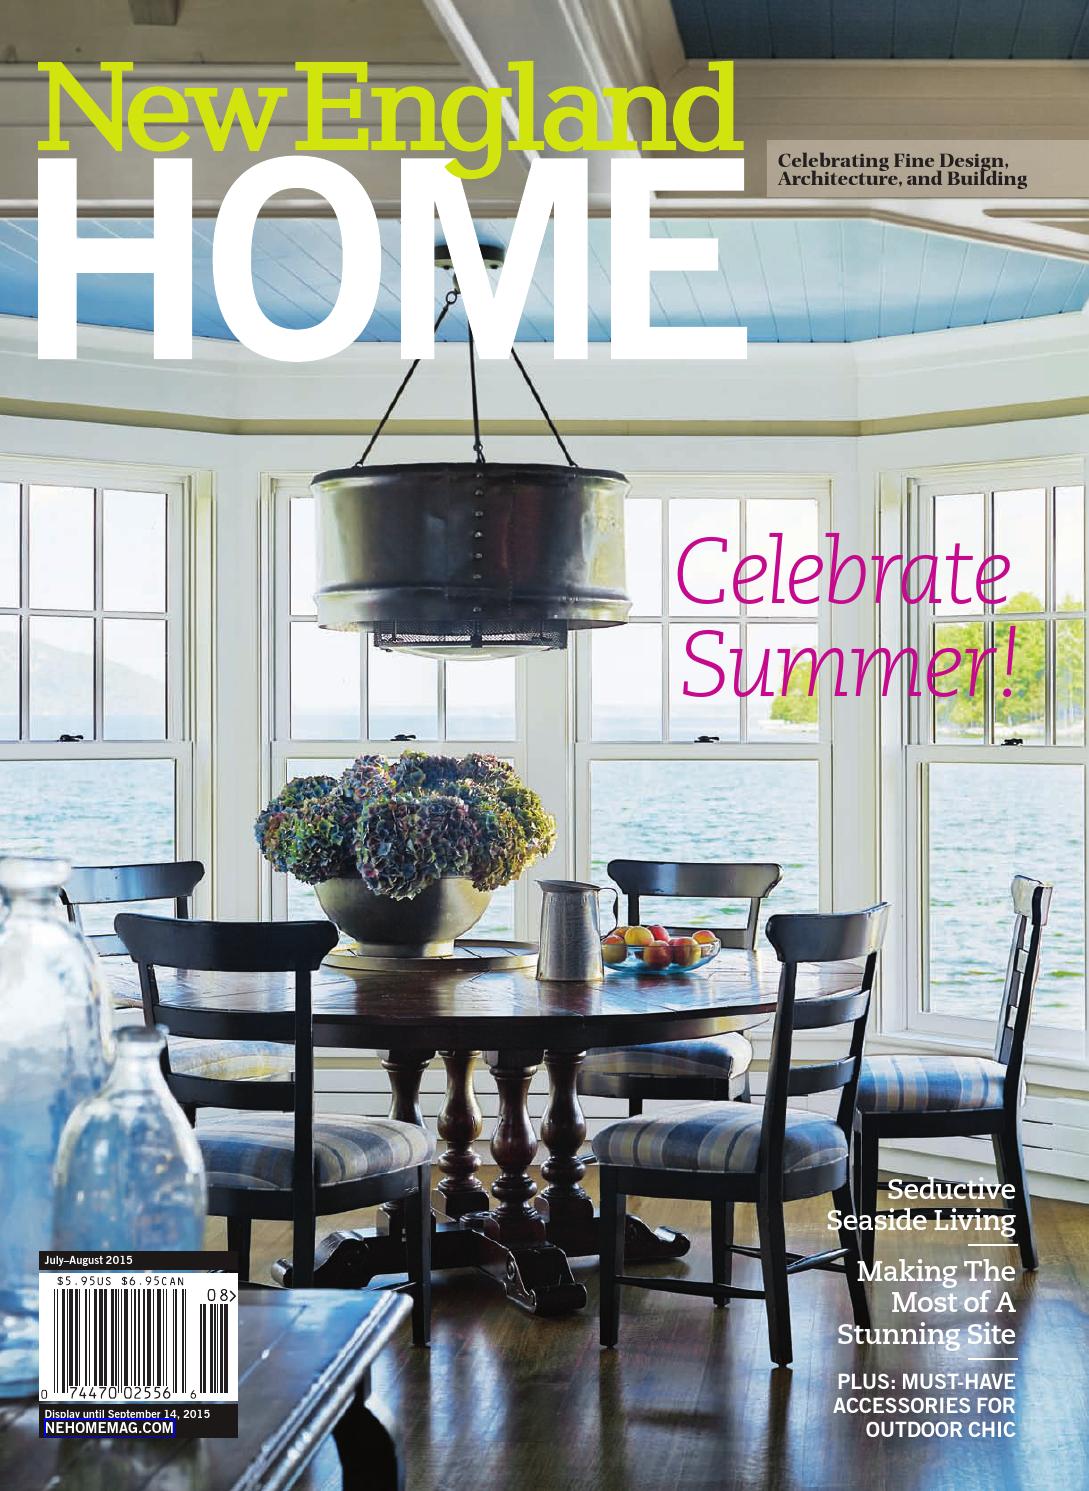 New England Home July August 2015